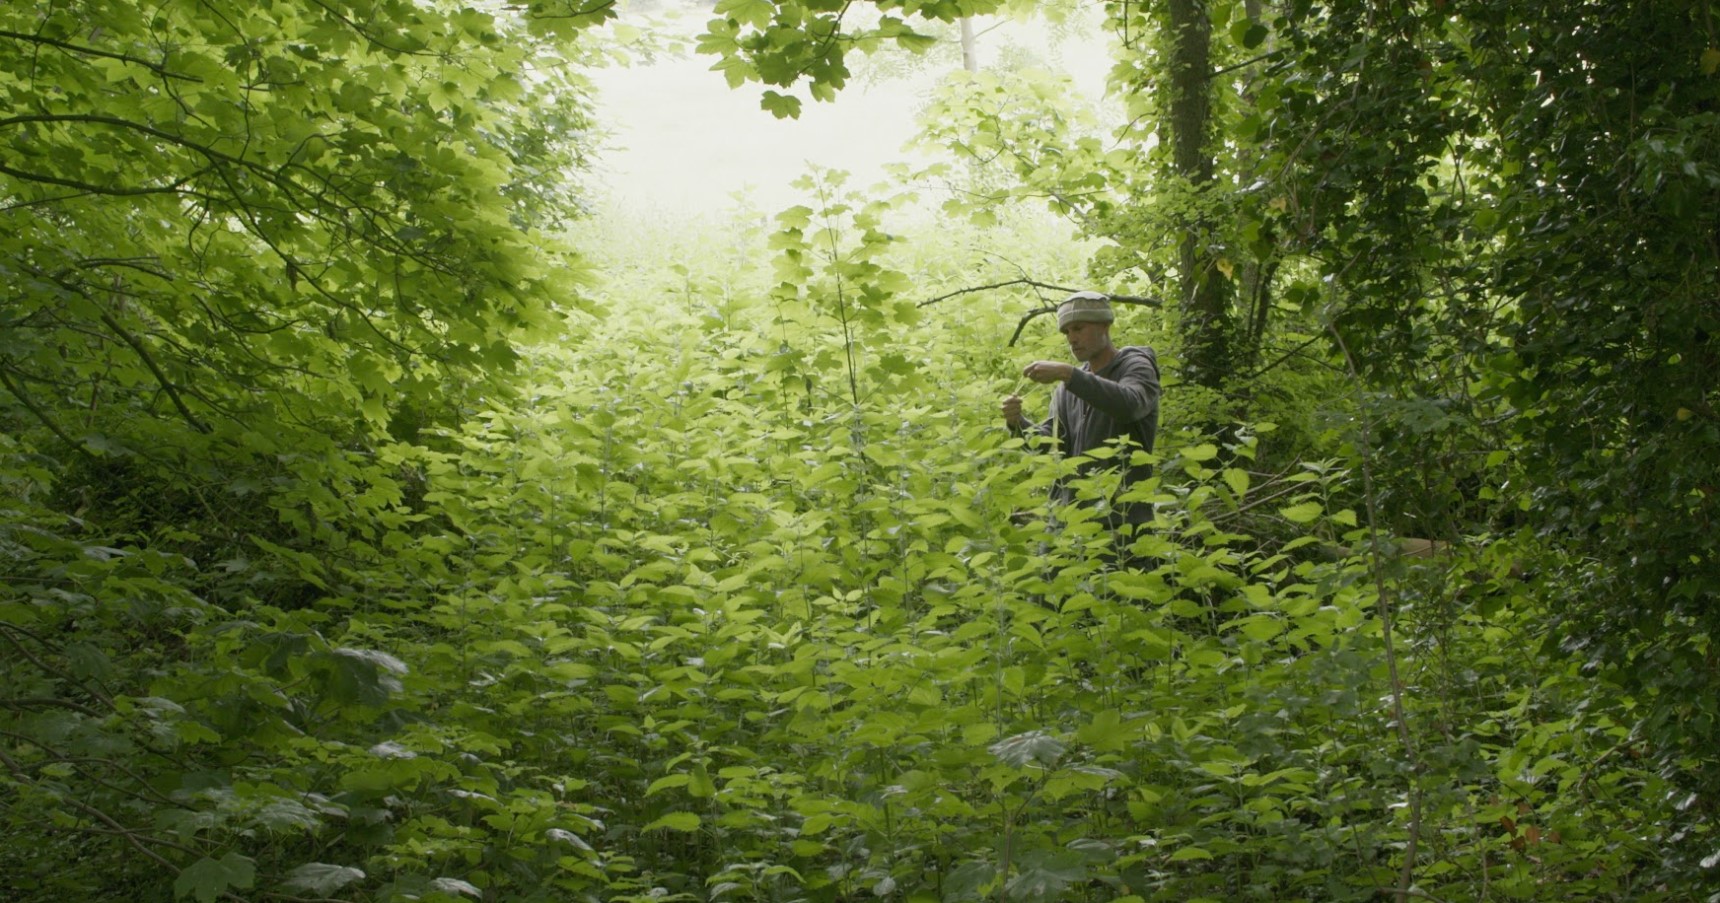 Allan Brown inspecting a tall area of nettles surrounded by lush green trees